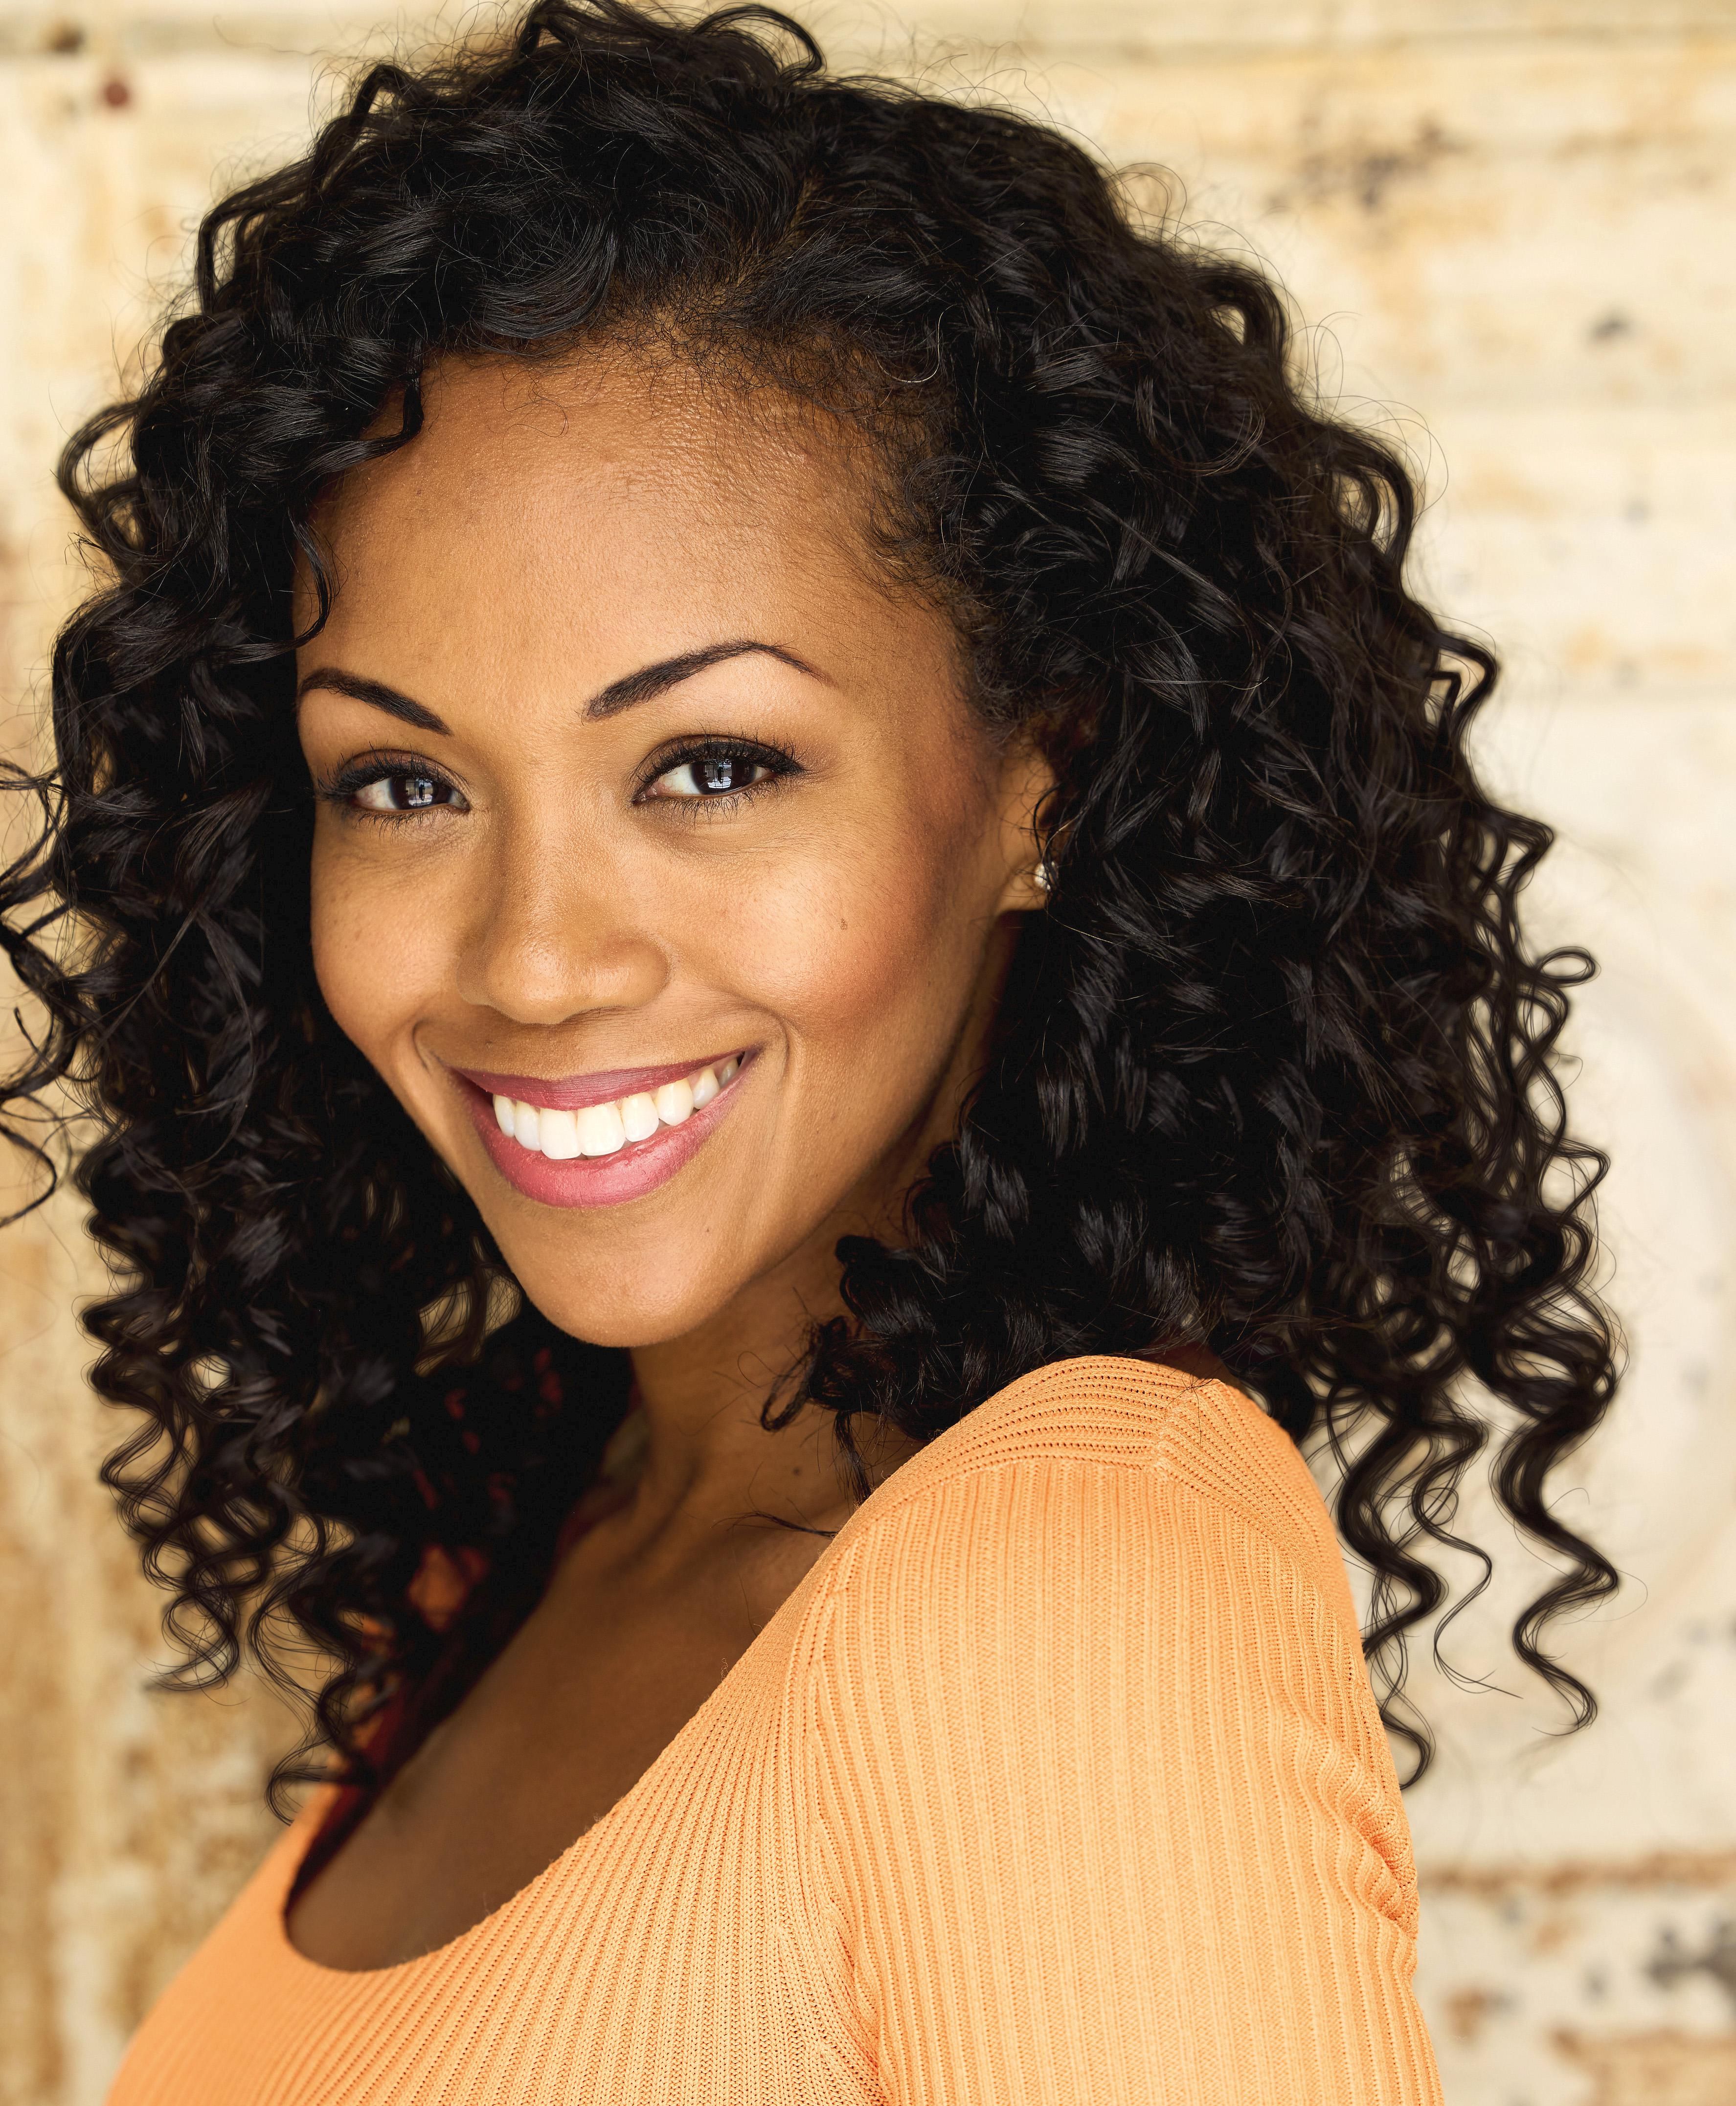 The Young and the Restless star Mishael Morgan wears a peach colored knit top while smiling broadly